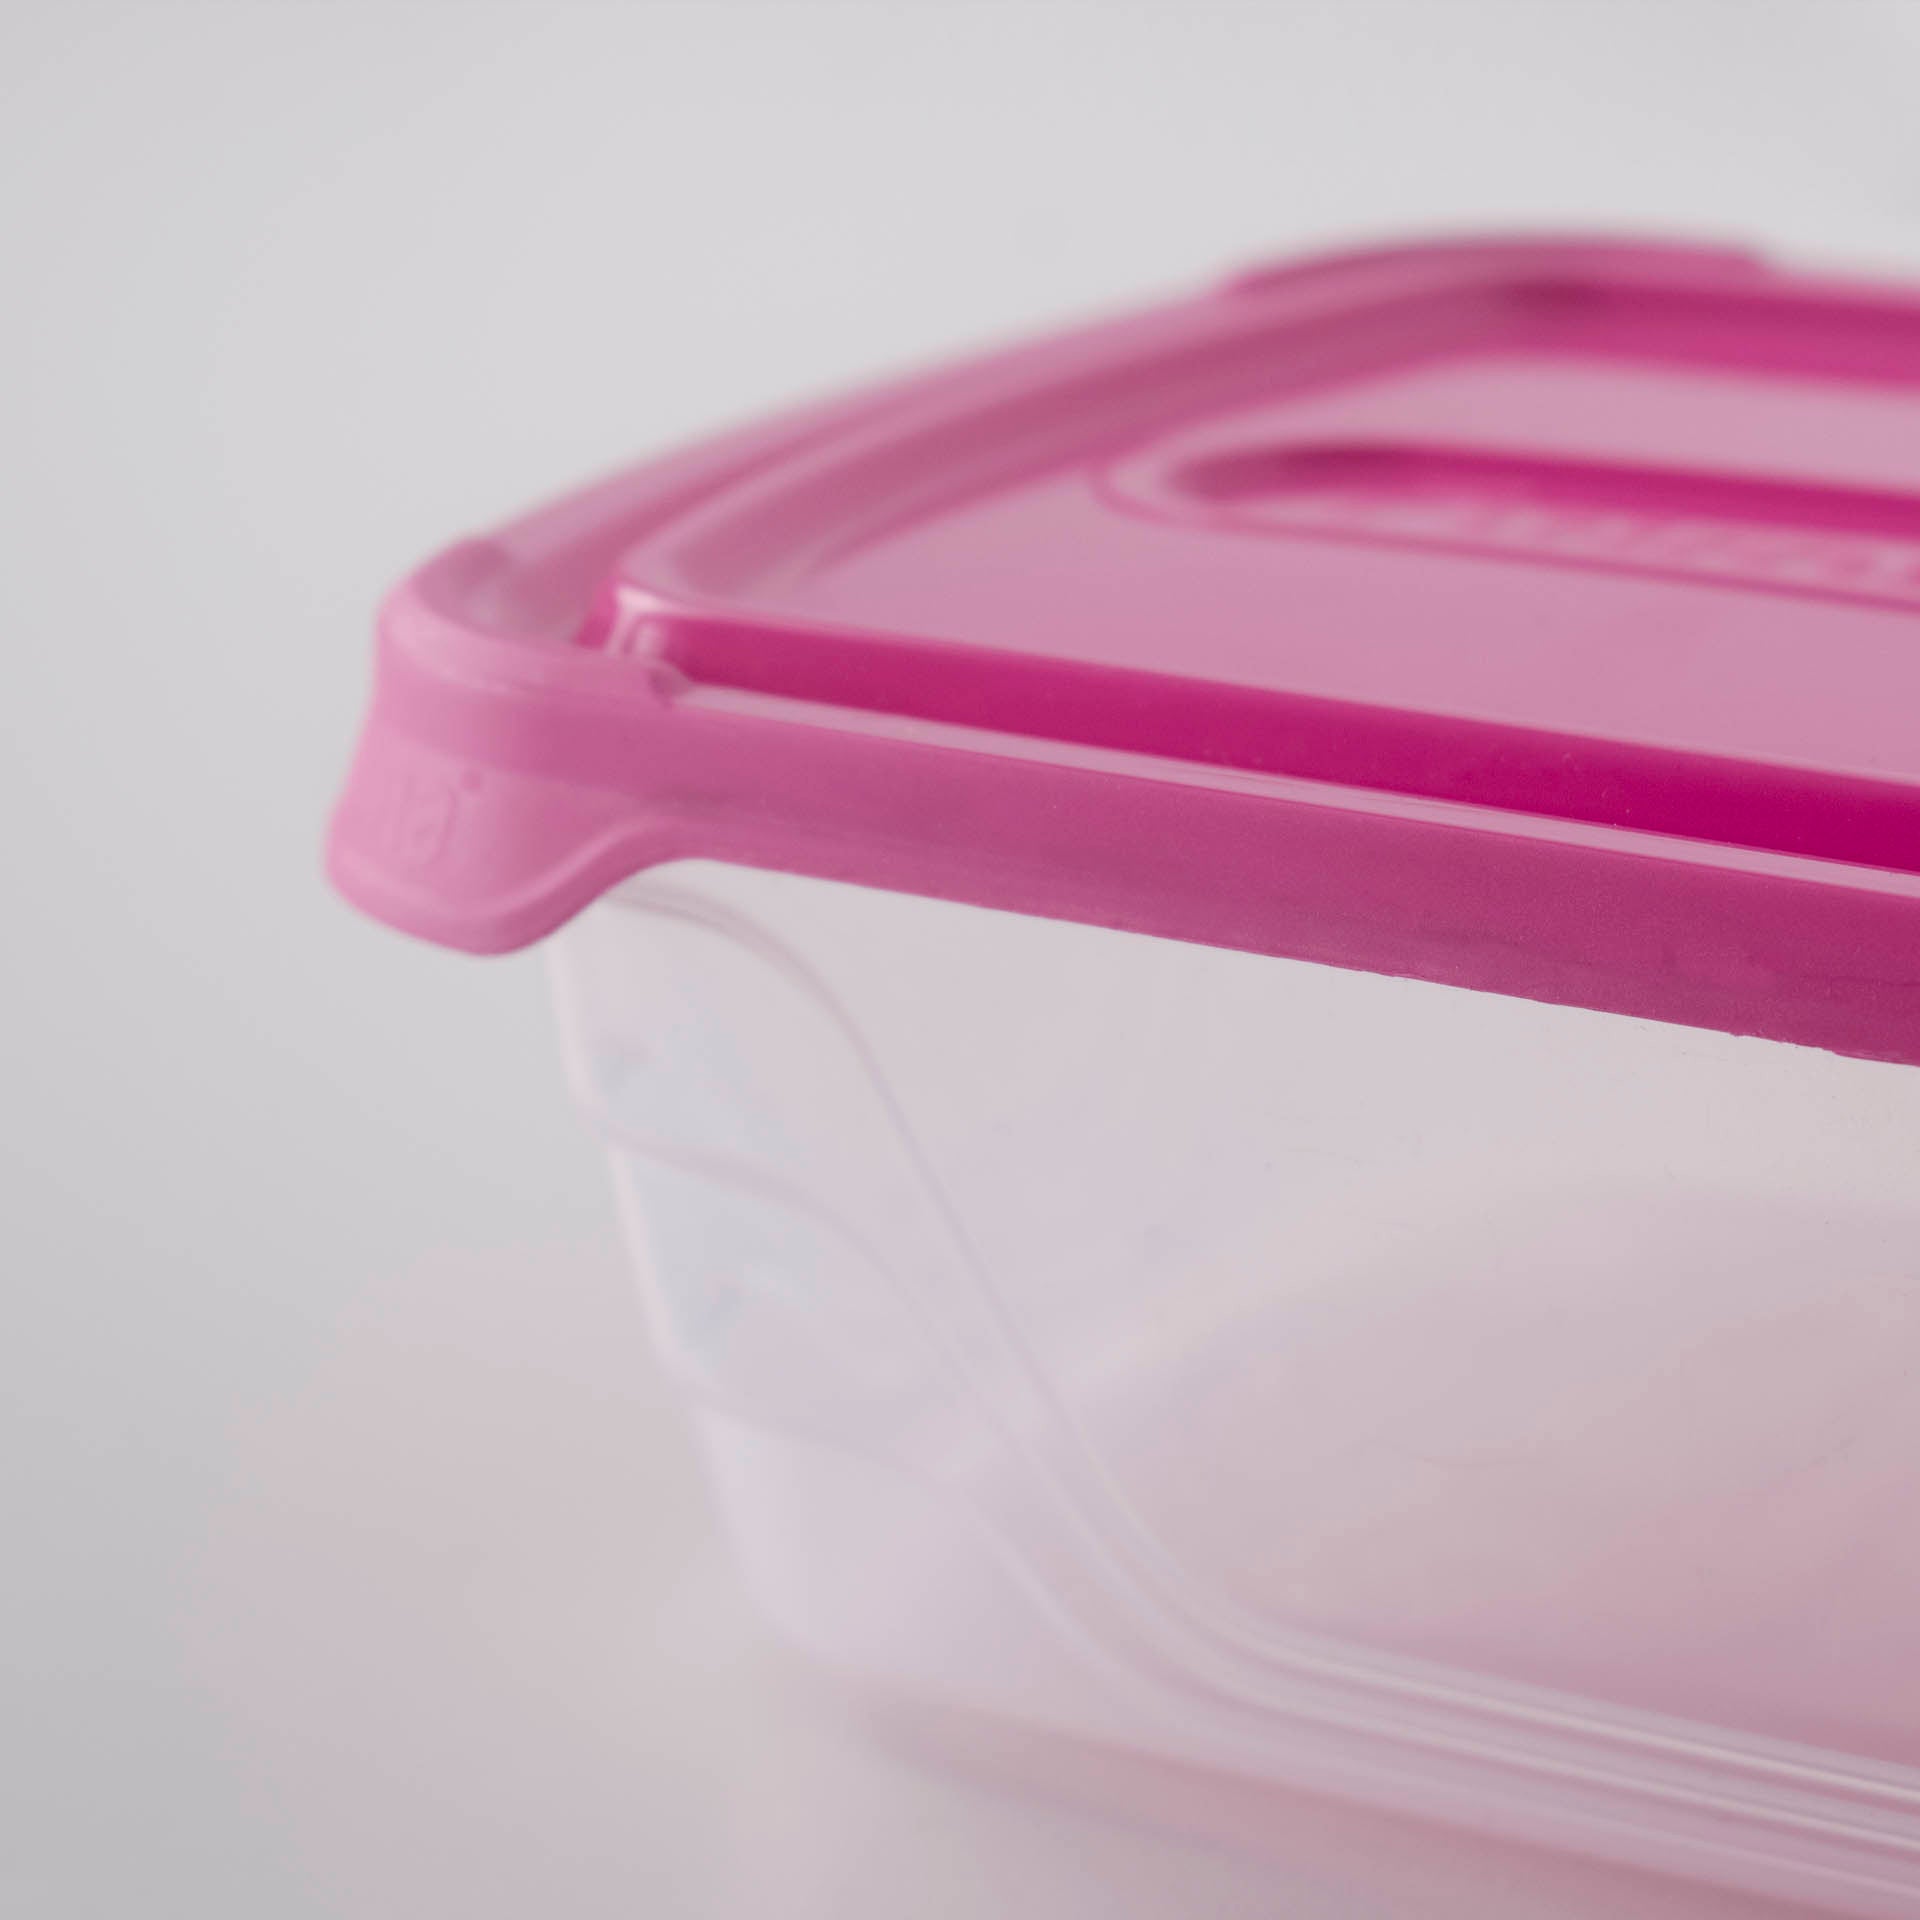 Otima Lunch Box 1.2L Snap It  Container